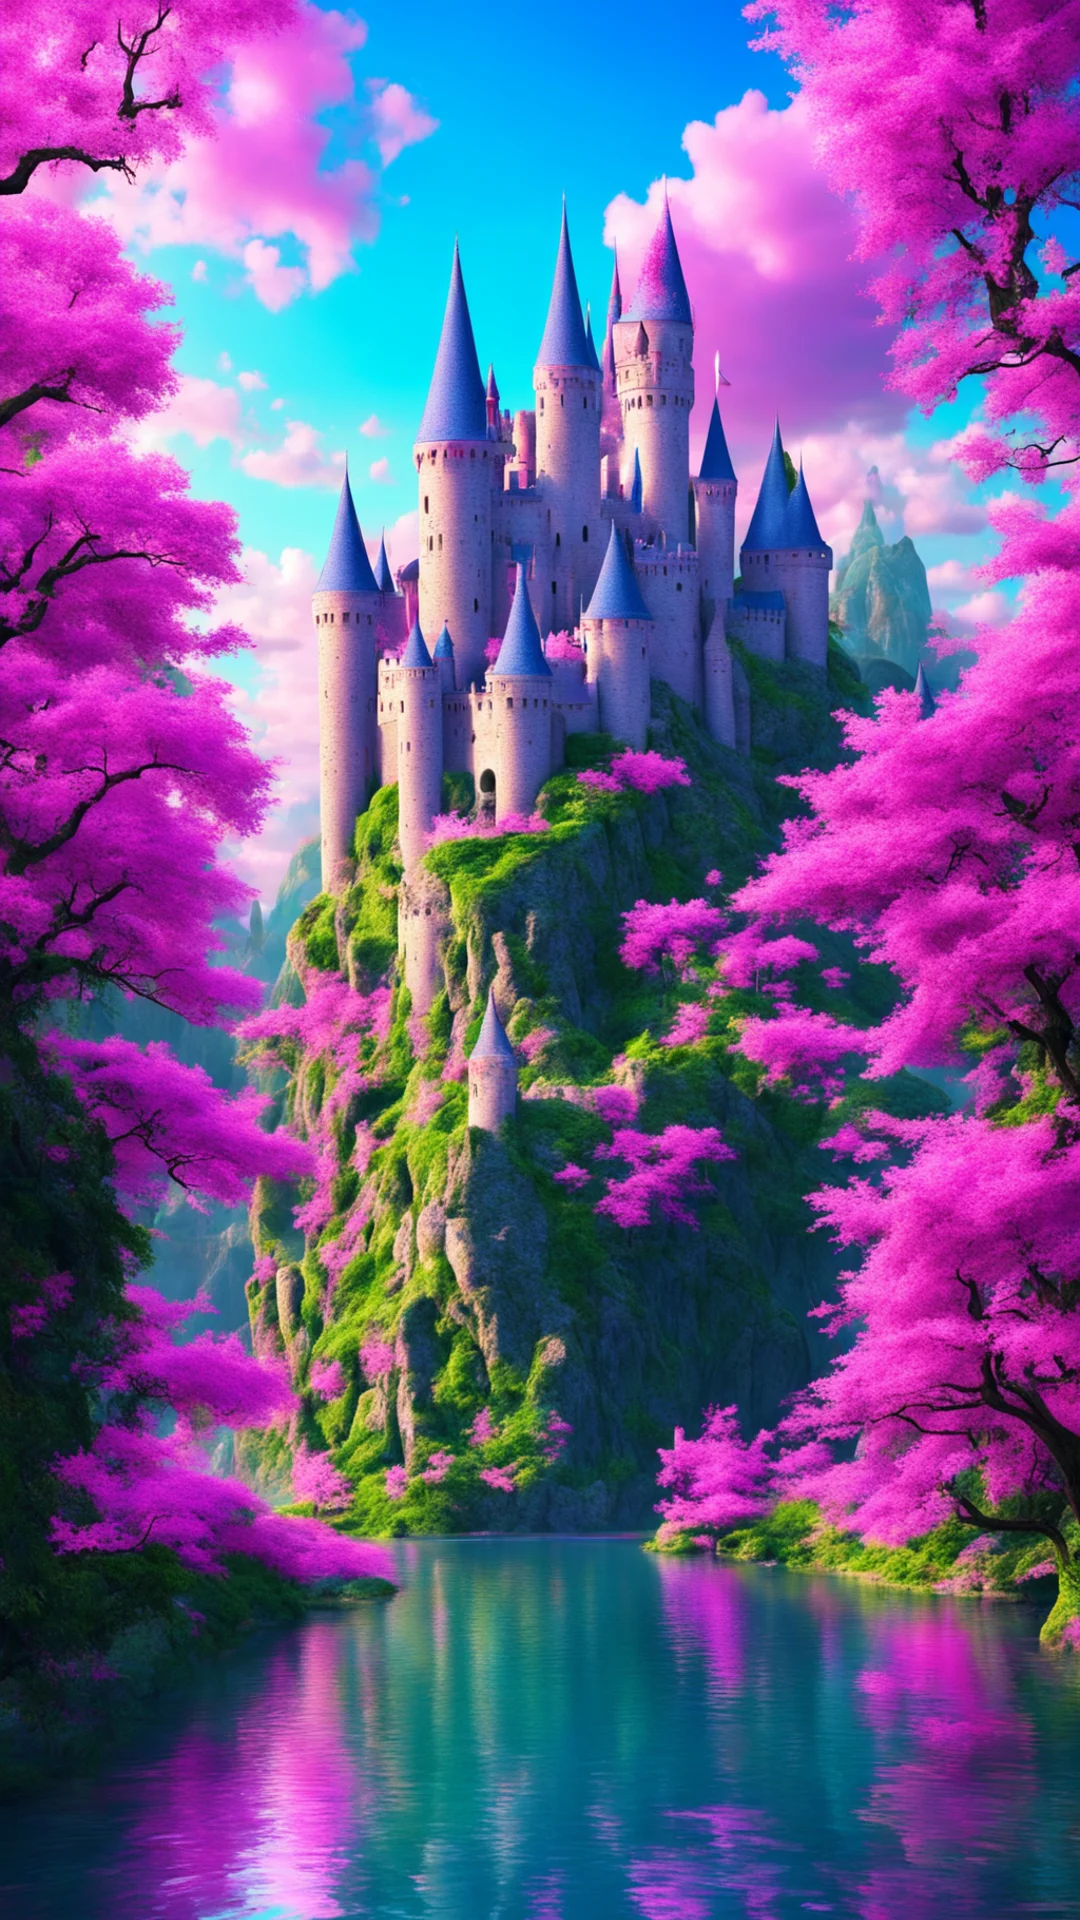 colorful amazing castle epic blue and pink fantasy castle moat amazing awesome portrait 2 tall